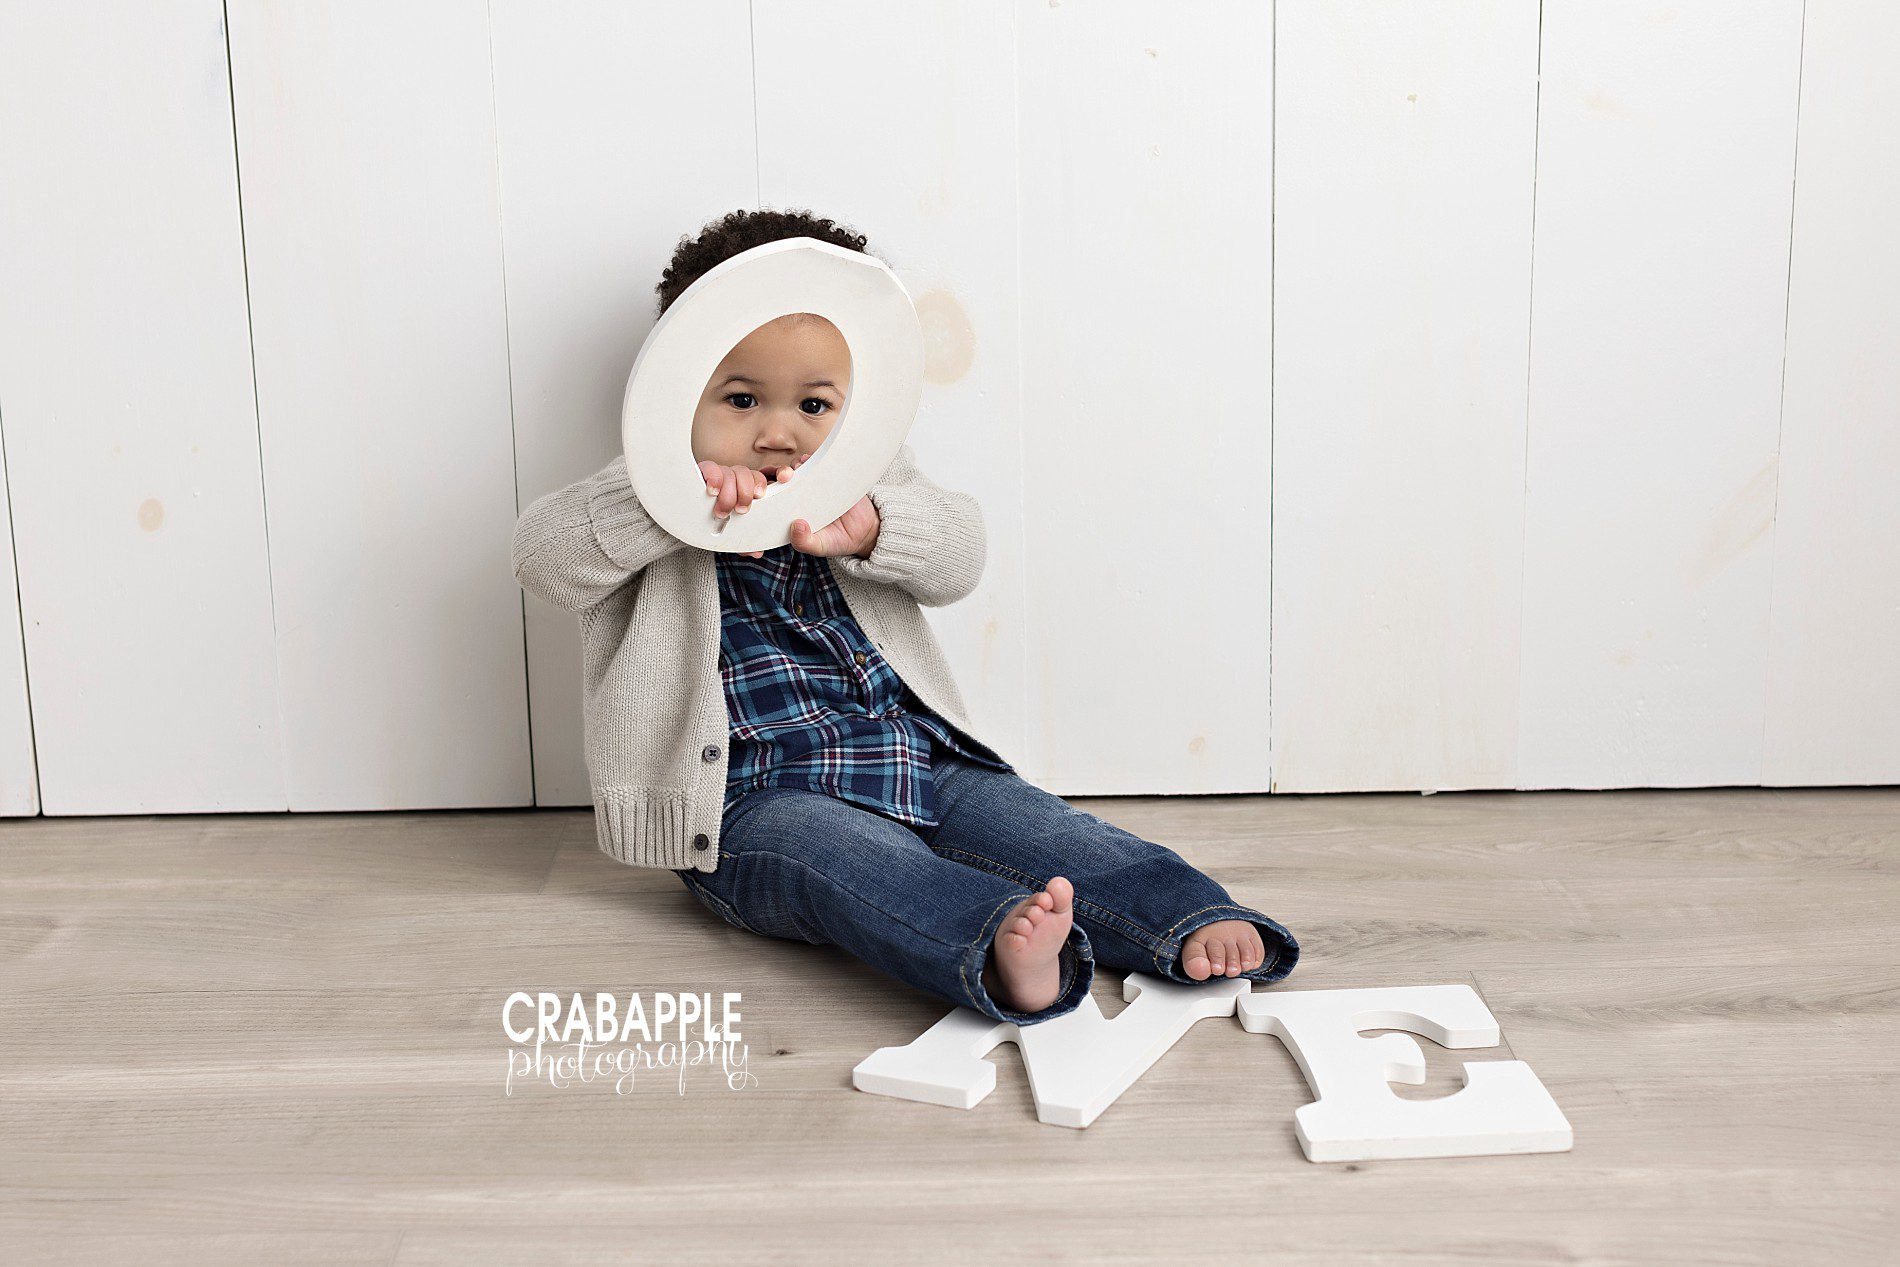 Using props and accessories during baby portrait photography sessions